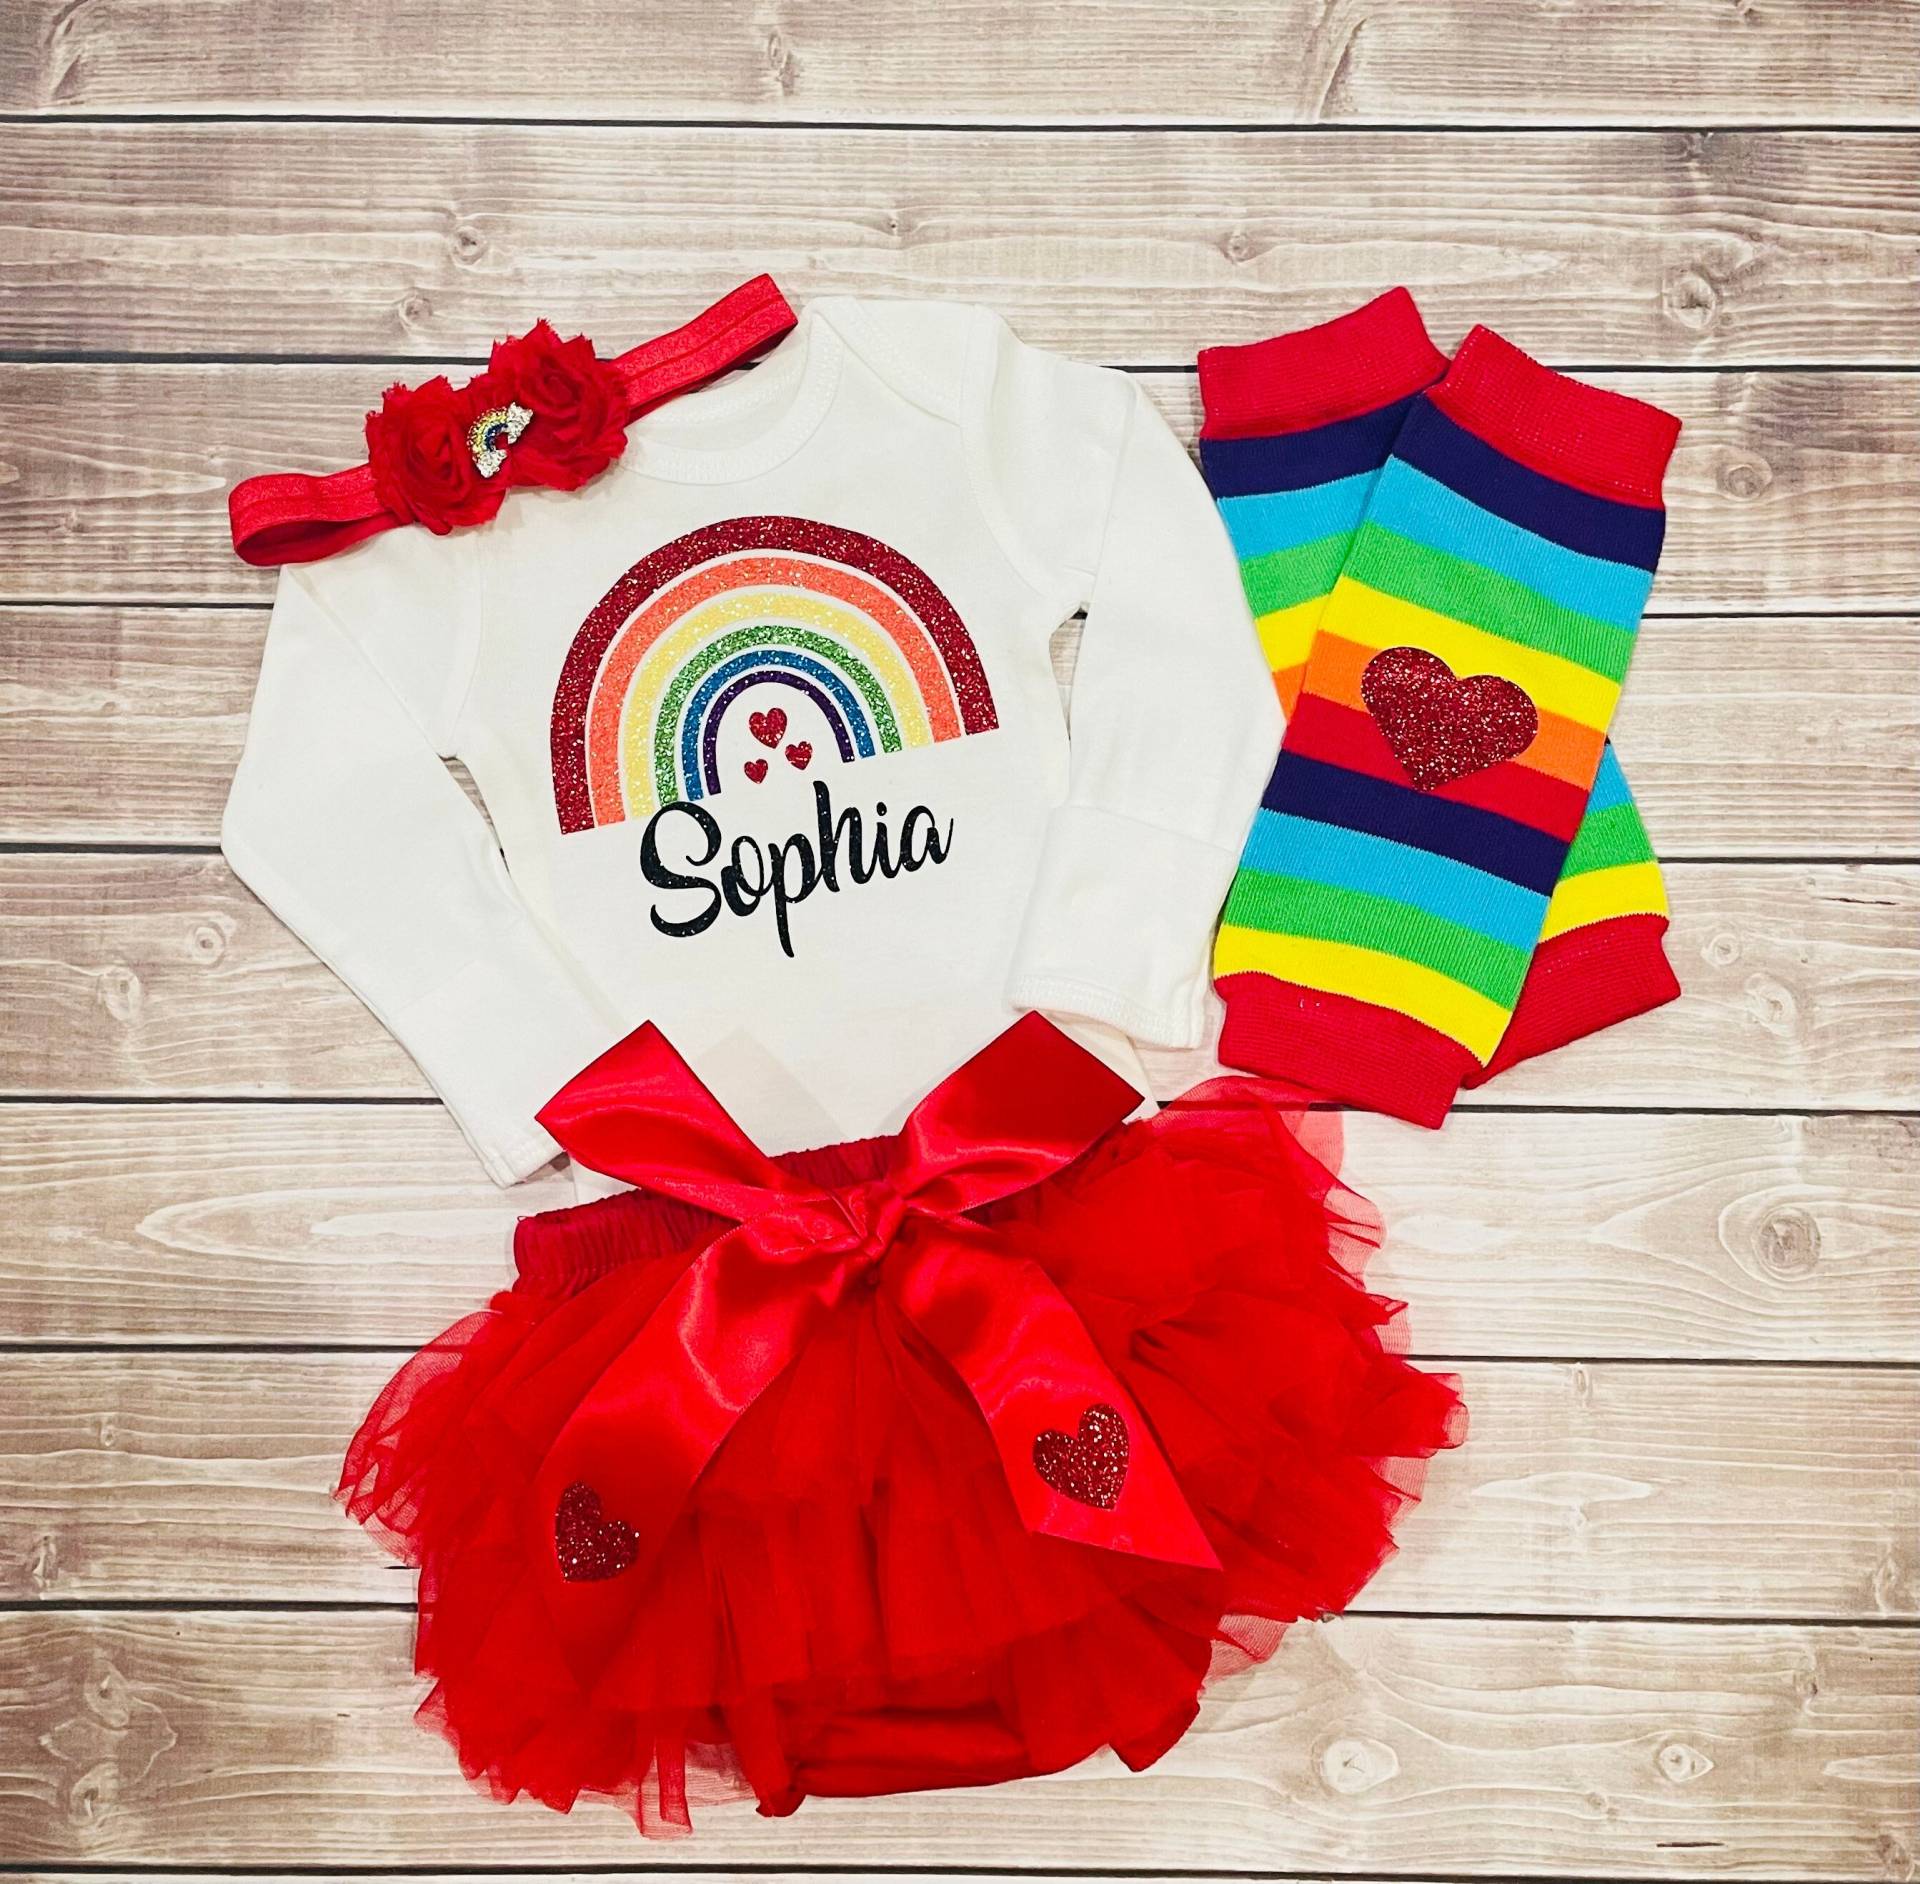 Regenbogen Baby Outfit, Personalisiertes Baby Mädchen Outfit, Take Me Home, Miracle Regenbogen Body, Coming Home von CutieCouture4u2